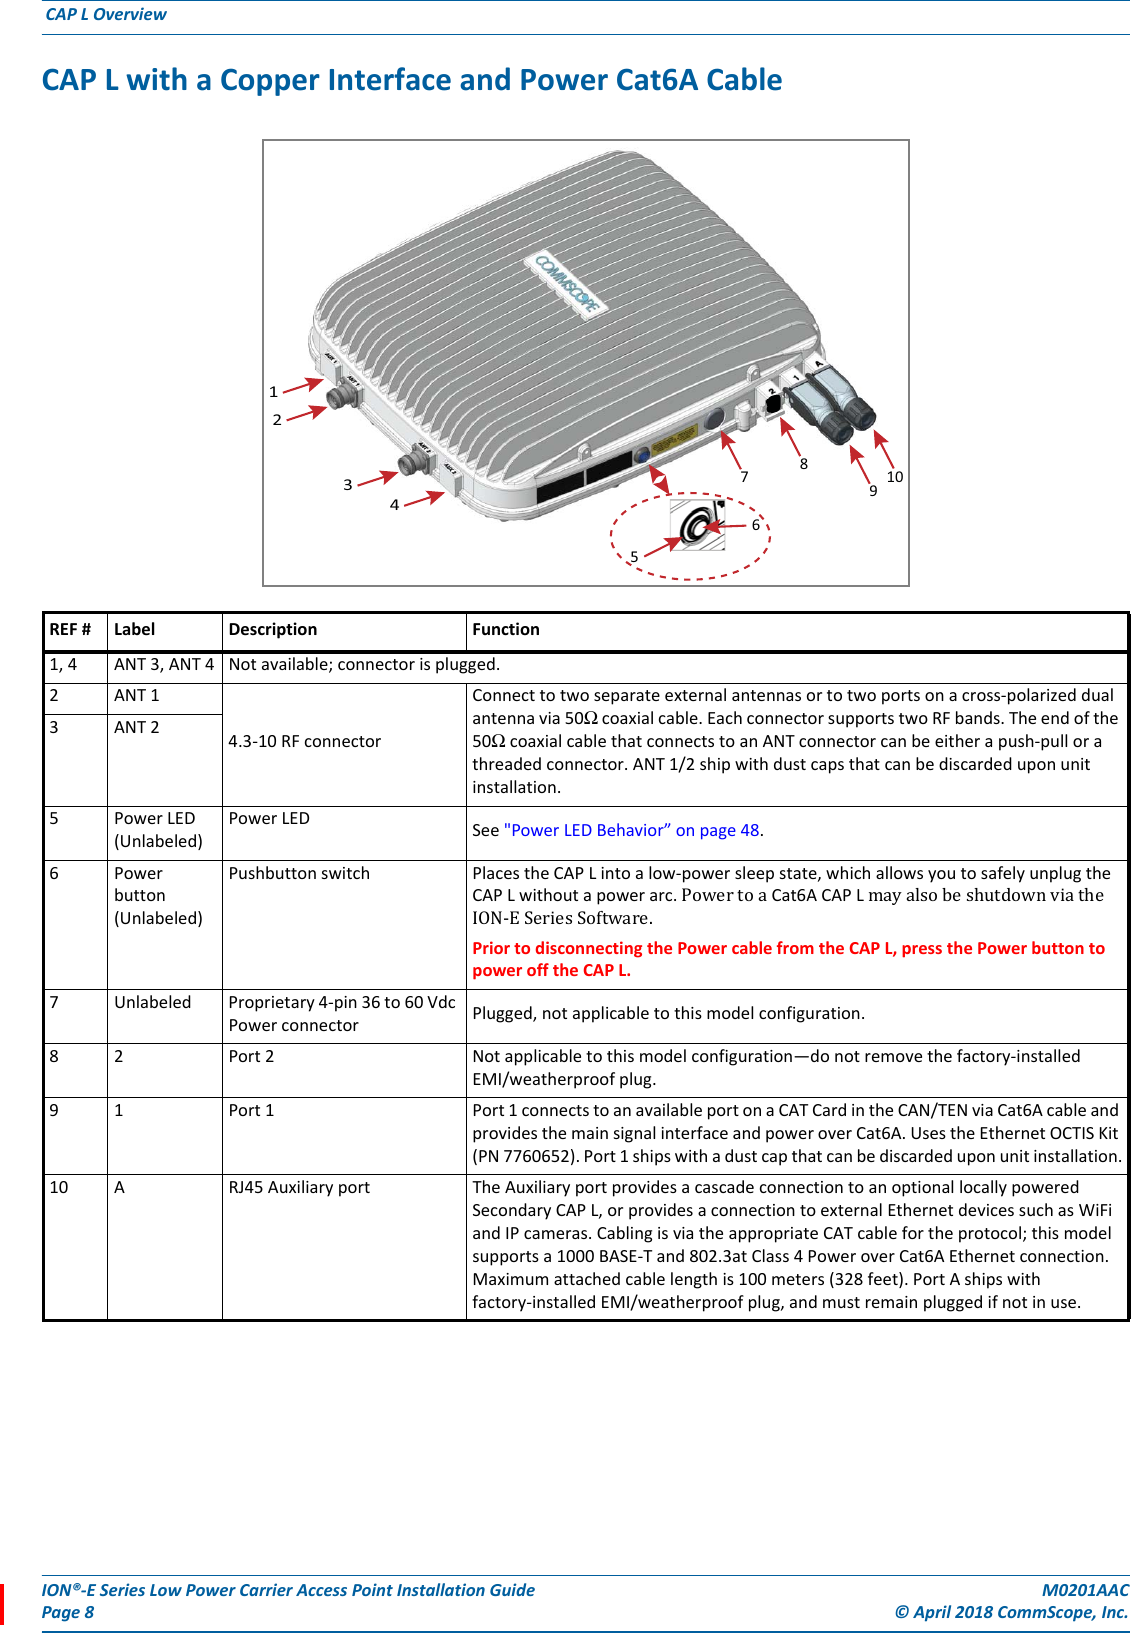 ION®-E Series Low Power Carrier Access Point Installation Guide M0201AACPage 8 © April 2018 CommScope, Inc. CAP L Overview  CAP L with a Copper Interface and Power Cat6A CableREF # Label Description Function1, 4 ANT 3, ANT 4 Not available; connector is plugged.2ANT 1 4.3-10 RF connectorConnect to two separate external antennas or to two ports on a cross-polarized dual antenna via 50Ω coaxial cable. Each connector supports two RF bands. The end of the 50Ω coaxial cable that connects to an ANT connector can be either a push-pull or a threaded connector. ANT 1/2 ship with dust caps that can be discarded upon unit installation. 3ANT 25Power LED (Unlabeled)Power LED See &quot;Power LED Behavior” on page 48.6Power button (Unlabeled)Pushbutton switch Places the CAP L into a low-power sleep state, which allows you to safely unplug the CAP L without a power arc. PowertoaCat6A CAP L mayalsobeshutdownviatheION-ESeriesSoftware.Prior to disconnecting the Power cable from the CAP L, press the Power button to power off the CAP L. 7 Unlabeled  Proprietary 4-pin 36 to 60 Vdc Power connector Plugged, not applicable to this model configuration.8 2  Port 2 Not applicable to this model configuration—do not remove the factory-installed EMI/weatherproof plug.9 1  Port 1 Port 1 connects to an available port on a CAT Card in the CAN/TEN via Cat6A cable and provides the main signal interface and power over Cat6A. Uses the Ethernet OCTIS Kit (PN 7760652). Port 1 ships with a dust cap that can be discarded upon unit installation.10 A RJ45 Auxiliary port The Auxiliary port provides a cascade connection to an optional locally powered Secondary CAP L, or provides a connection to external Ethernet devices such as WiFi and IP cameras. Cabling is via the appropriate CAT cable for the protocol; this model supports a 1000 BASE-T and 802.3at Class 4 Power over Cat6A Ethernet connection. Maximum attached cable length is 100 meters (328 feet). Port A ships with factory-installed EMI/weatherproof plug, and must remain plugged if not in use. 12347891056